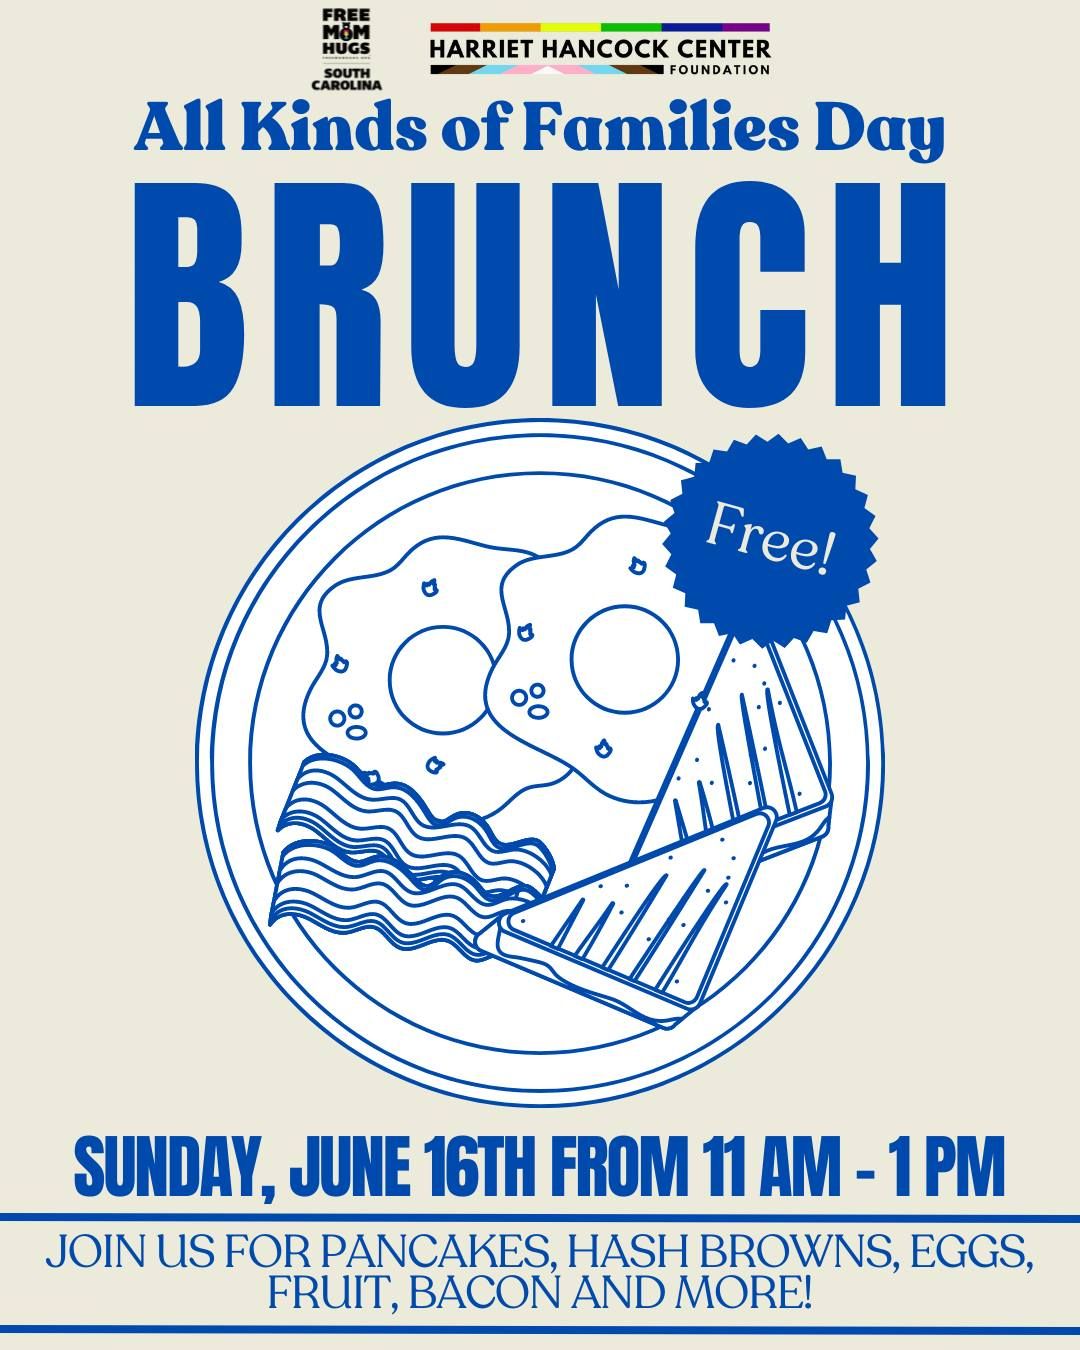 All Kinds of Families Day: Father's Day Brunch